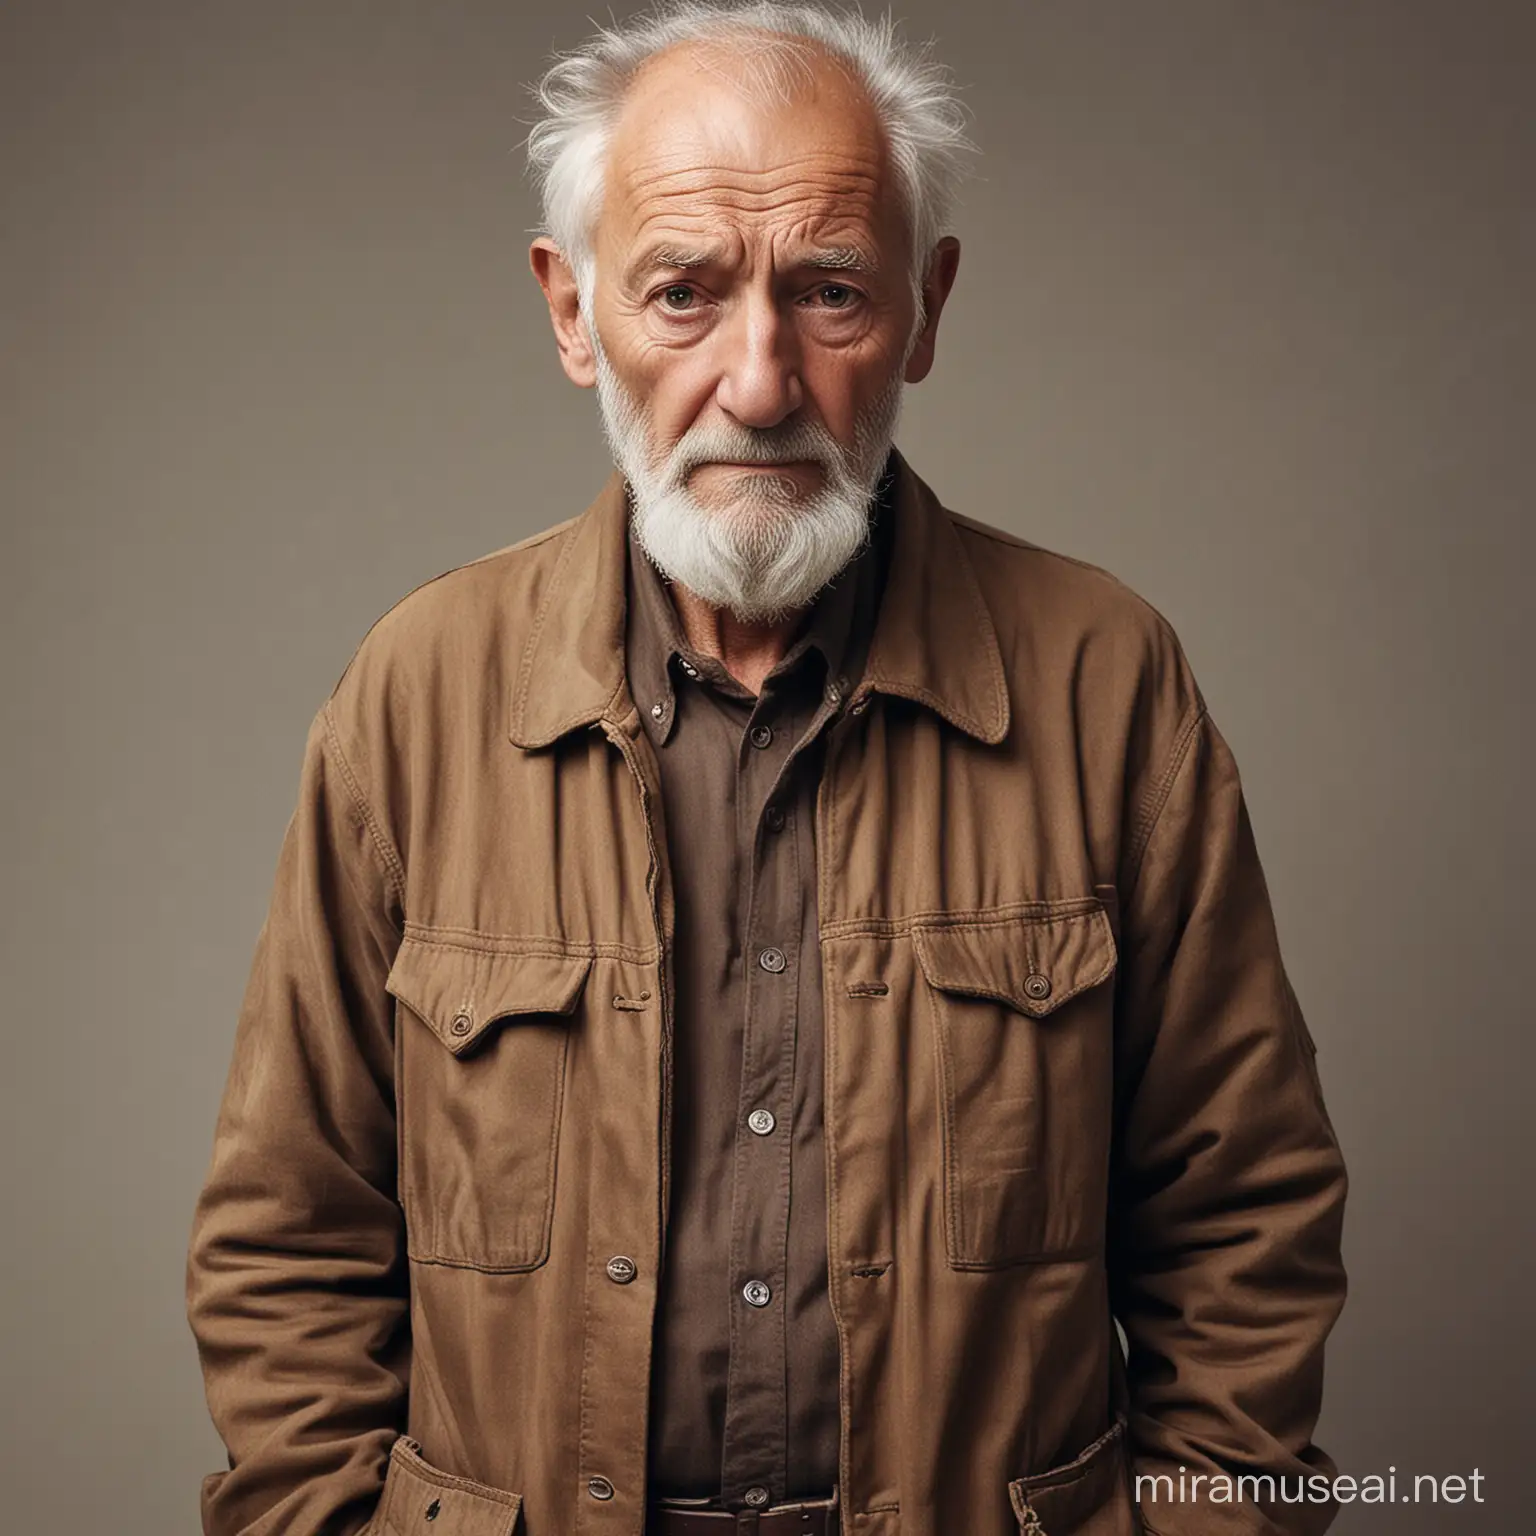 old man, 65. Does look like he's tired and does not take care of himself. Wars brown clothing